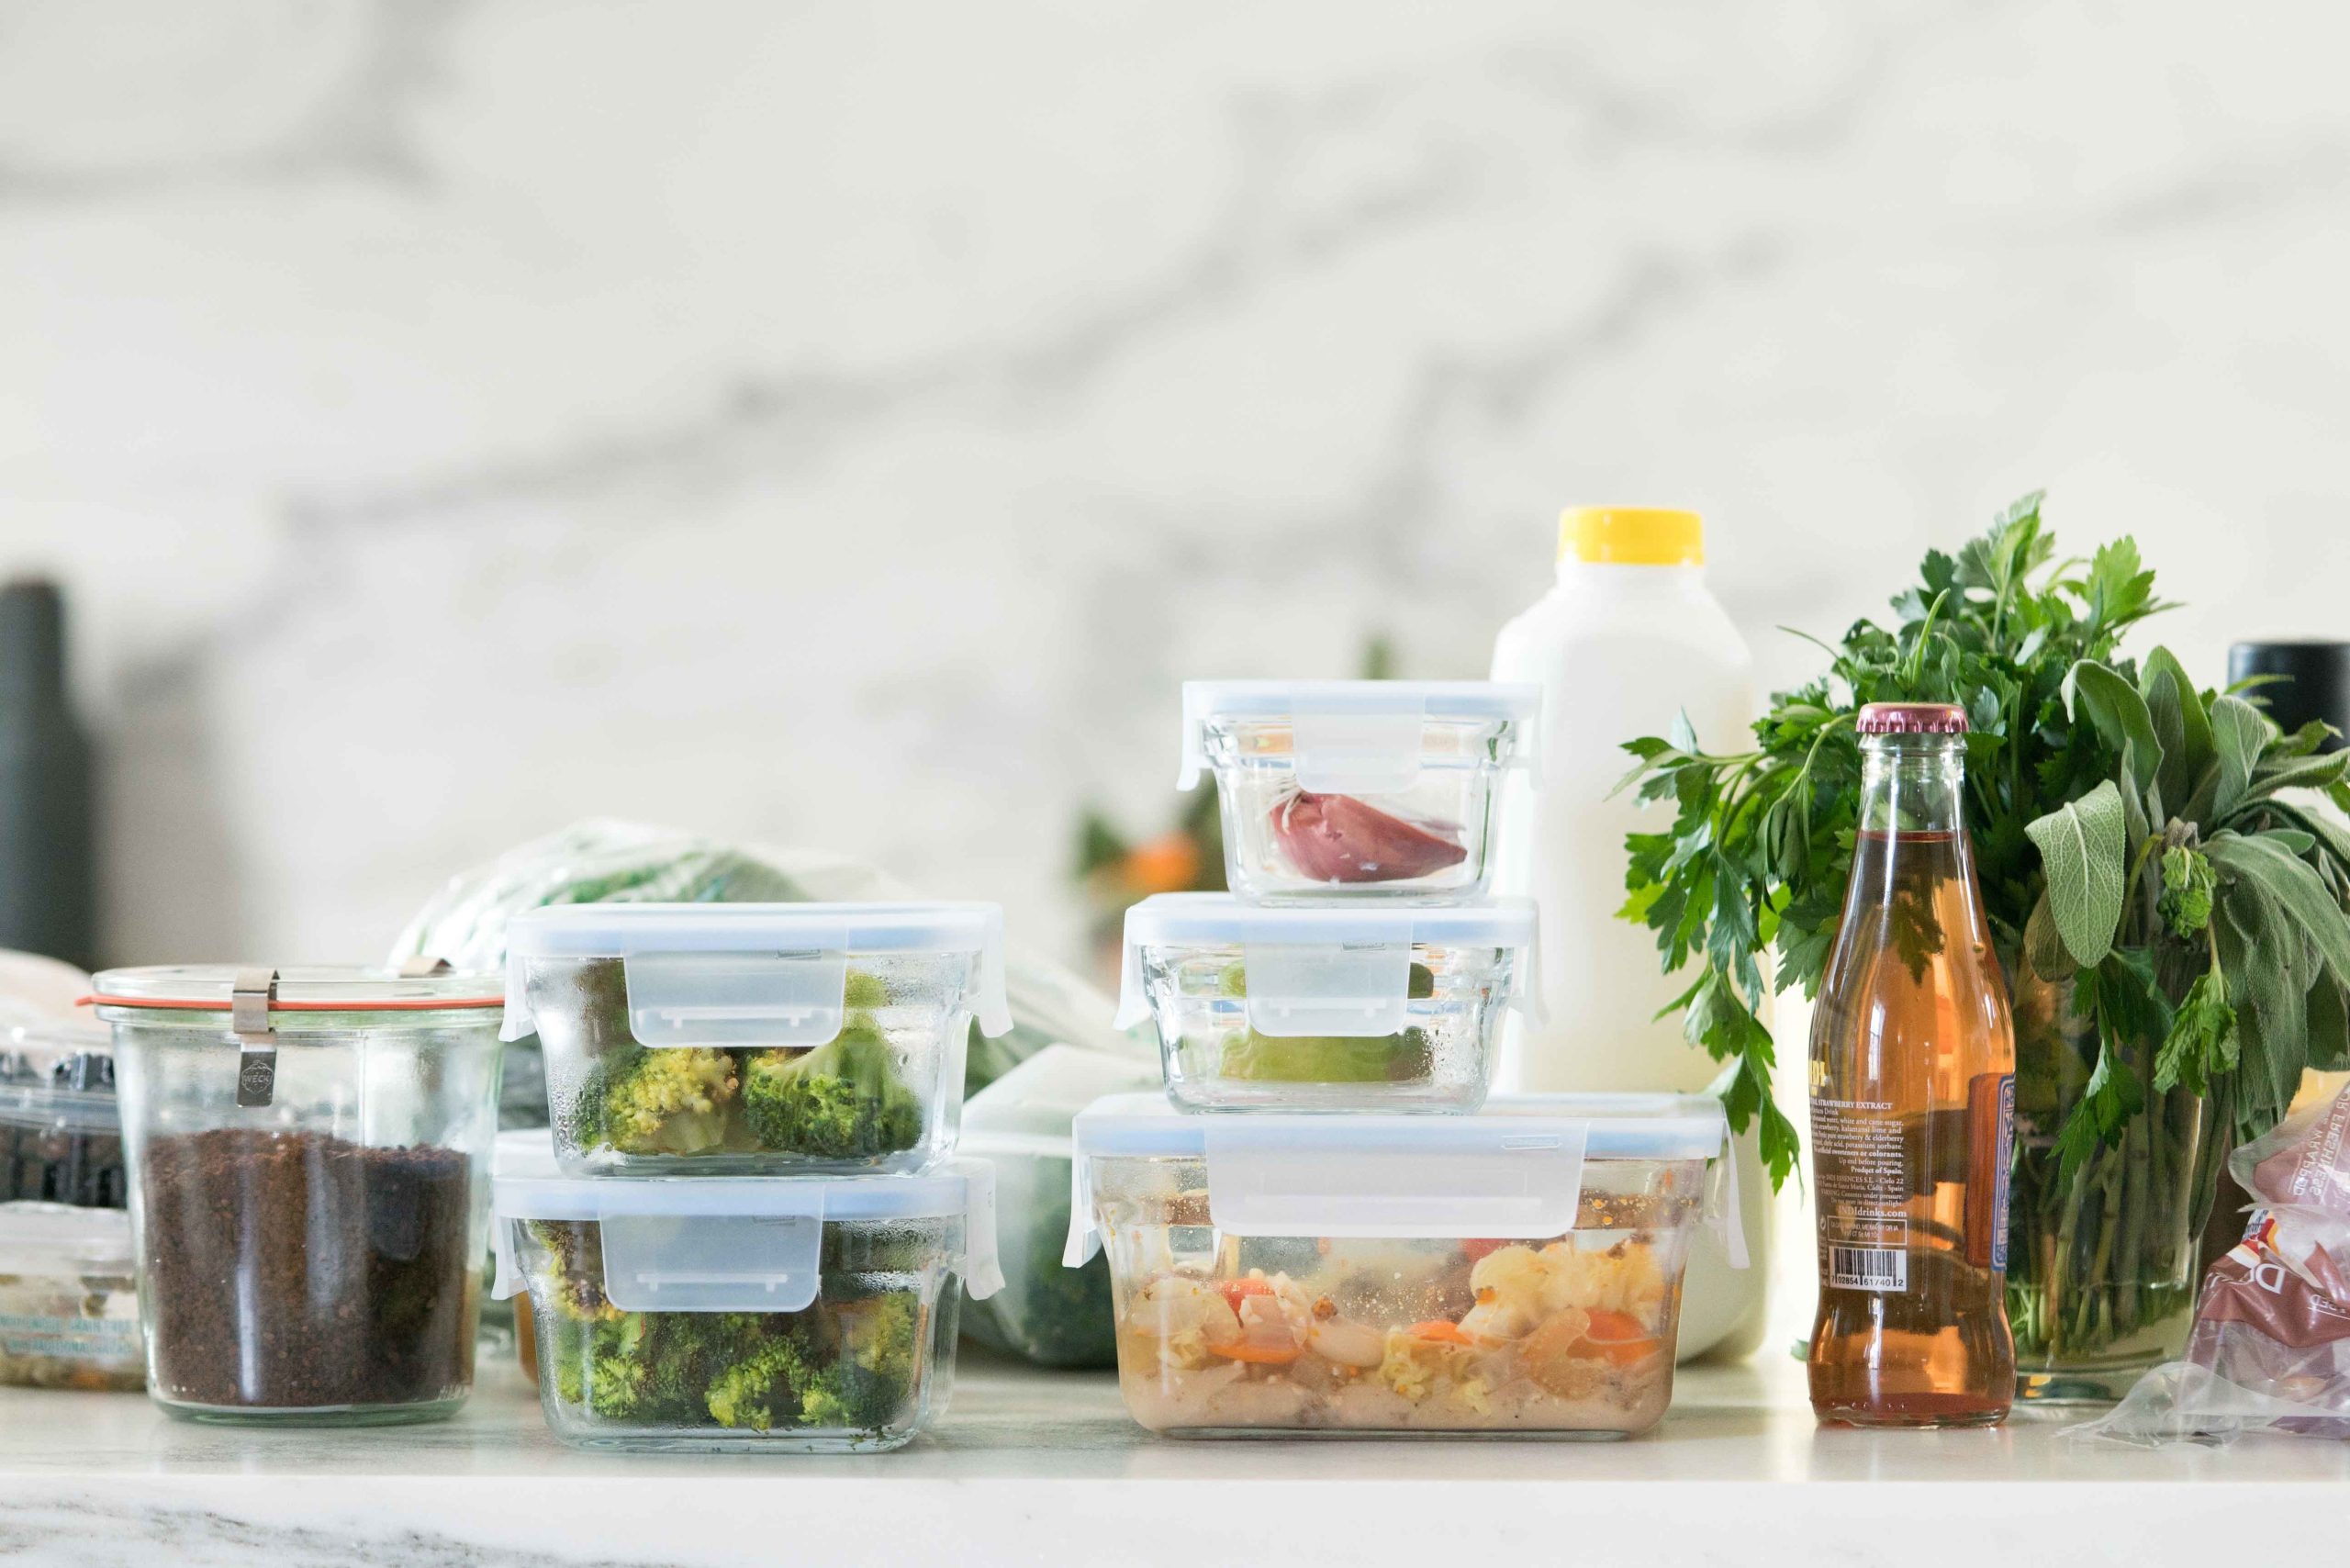 5 Steps to the Pre-Holiday Fridge Clear Out